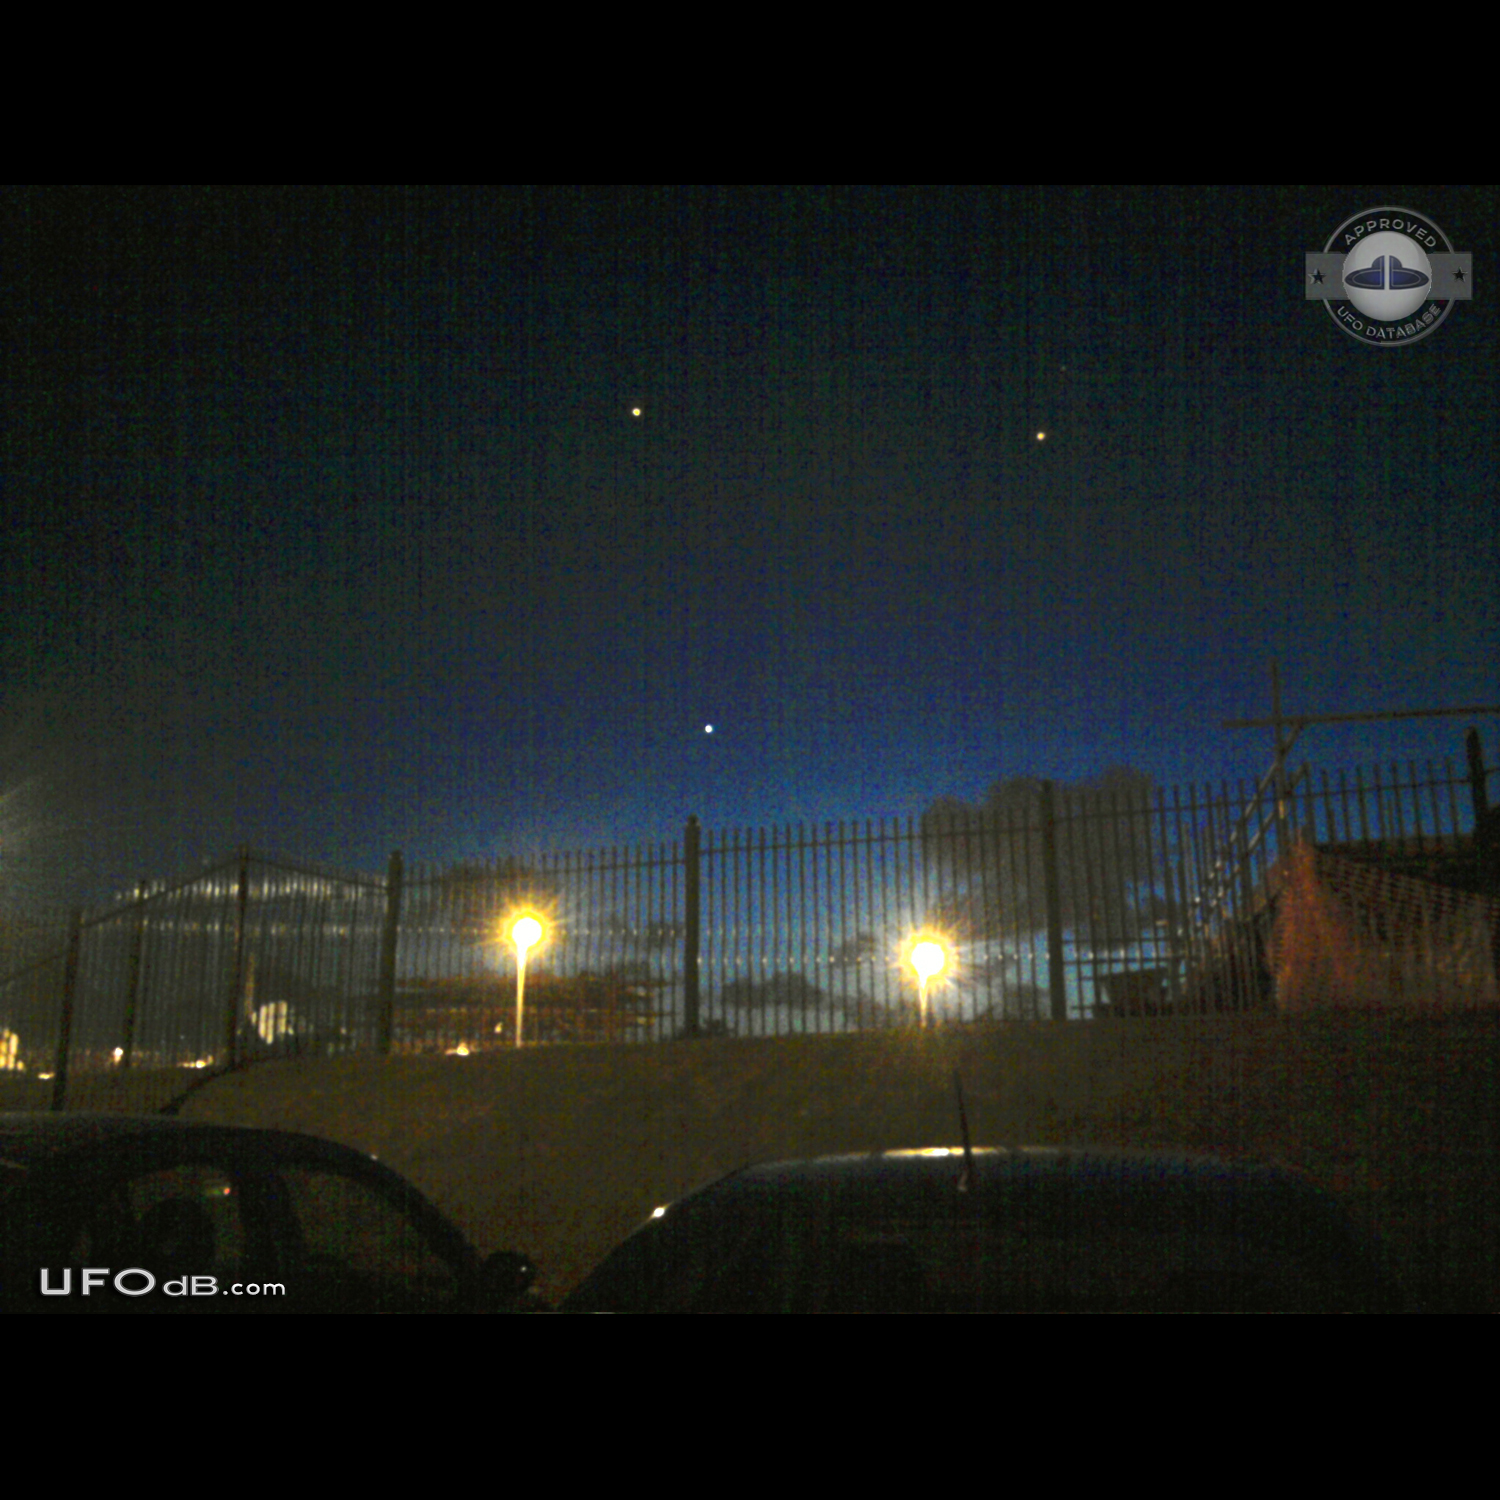 UFO sightings happen in many occasion over Liverpool, England - 2012 UFO Picture #451-2